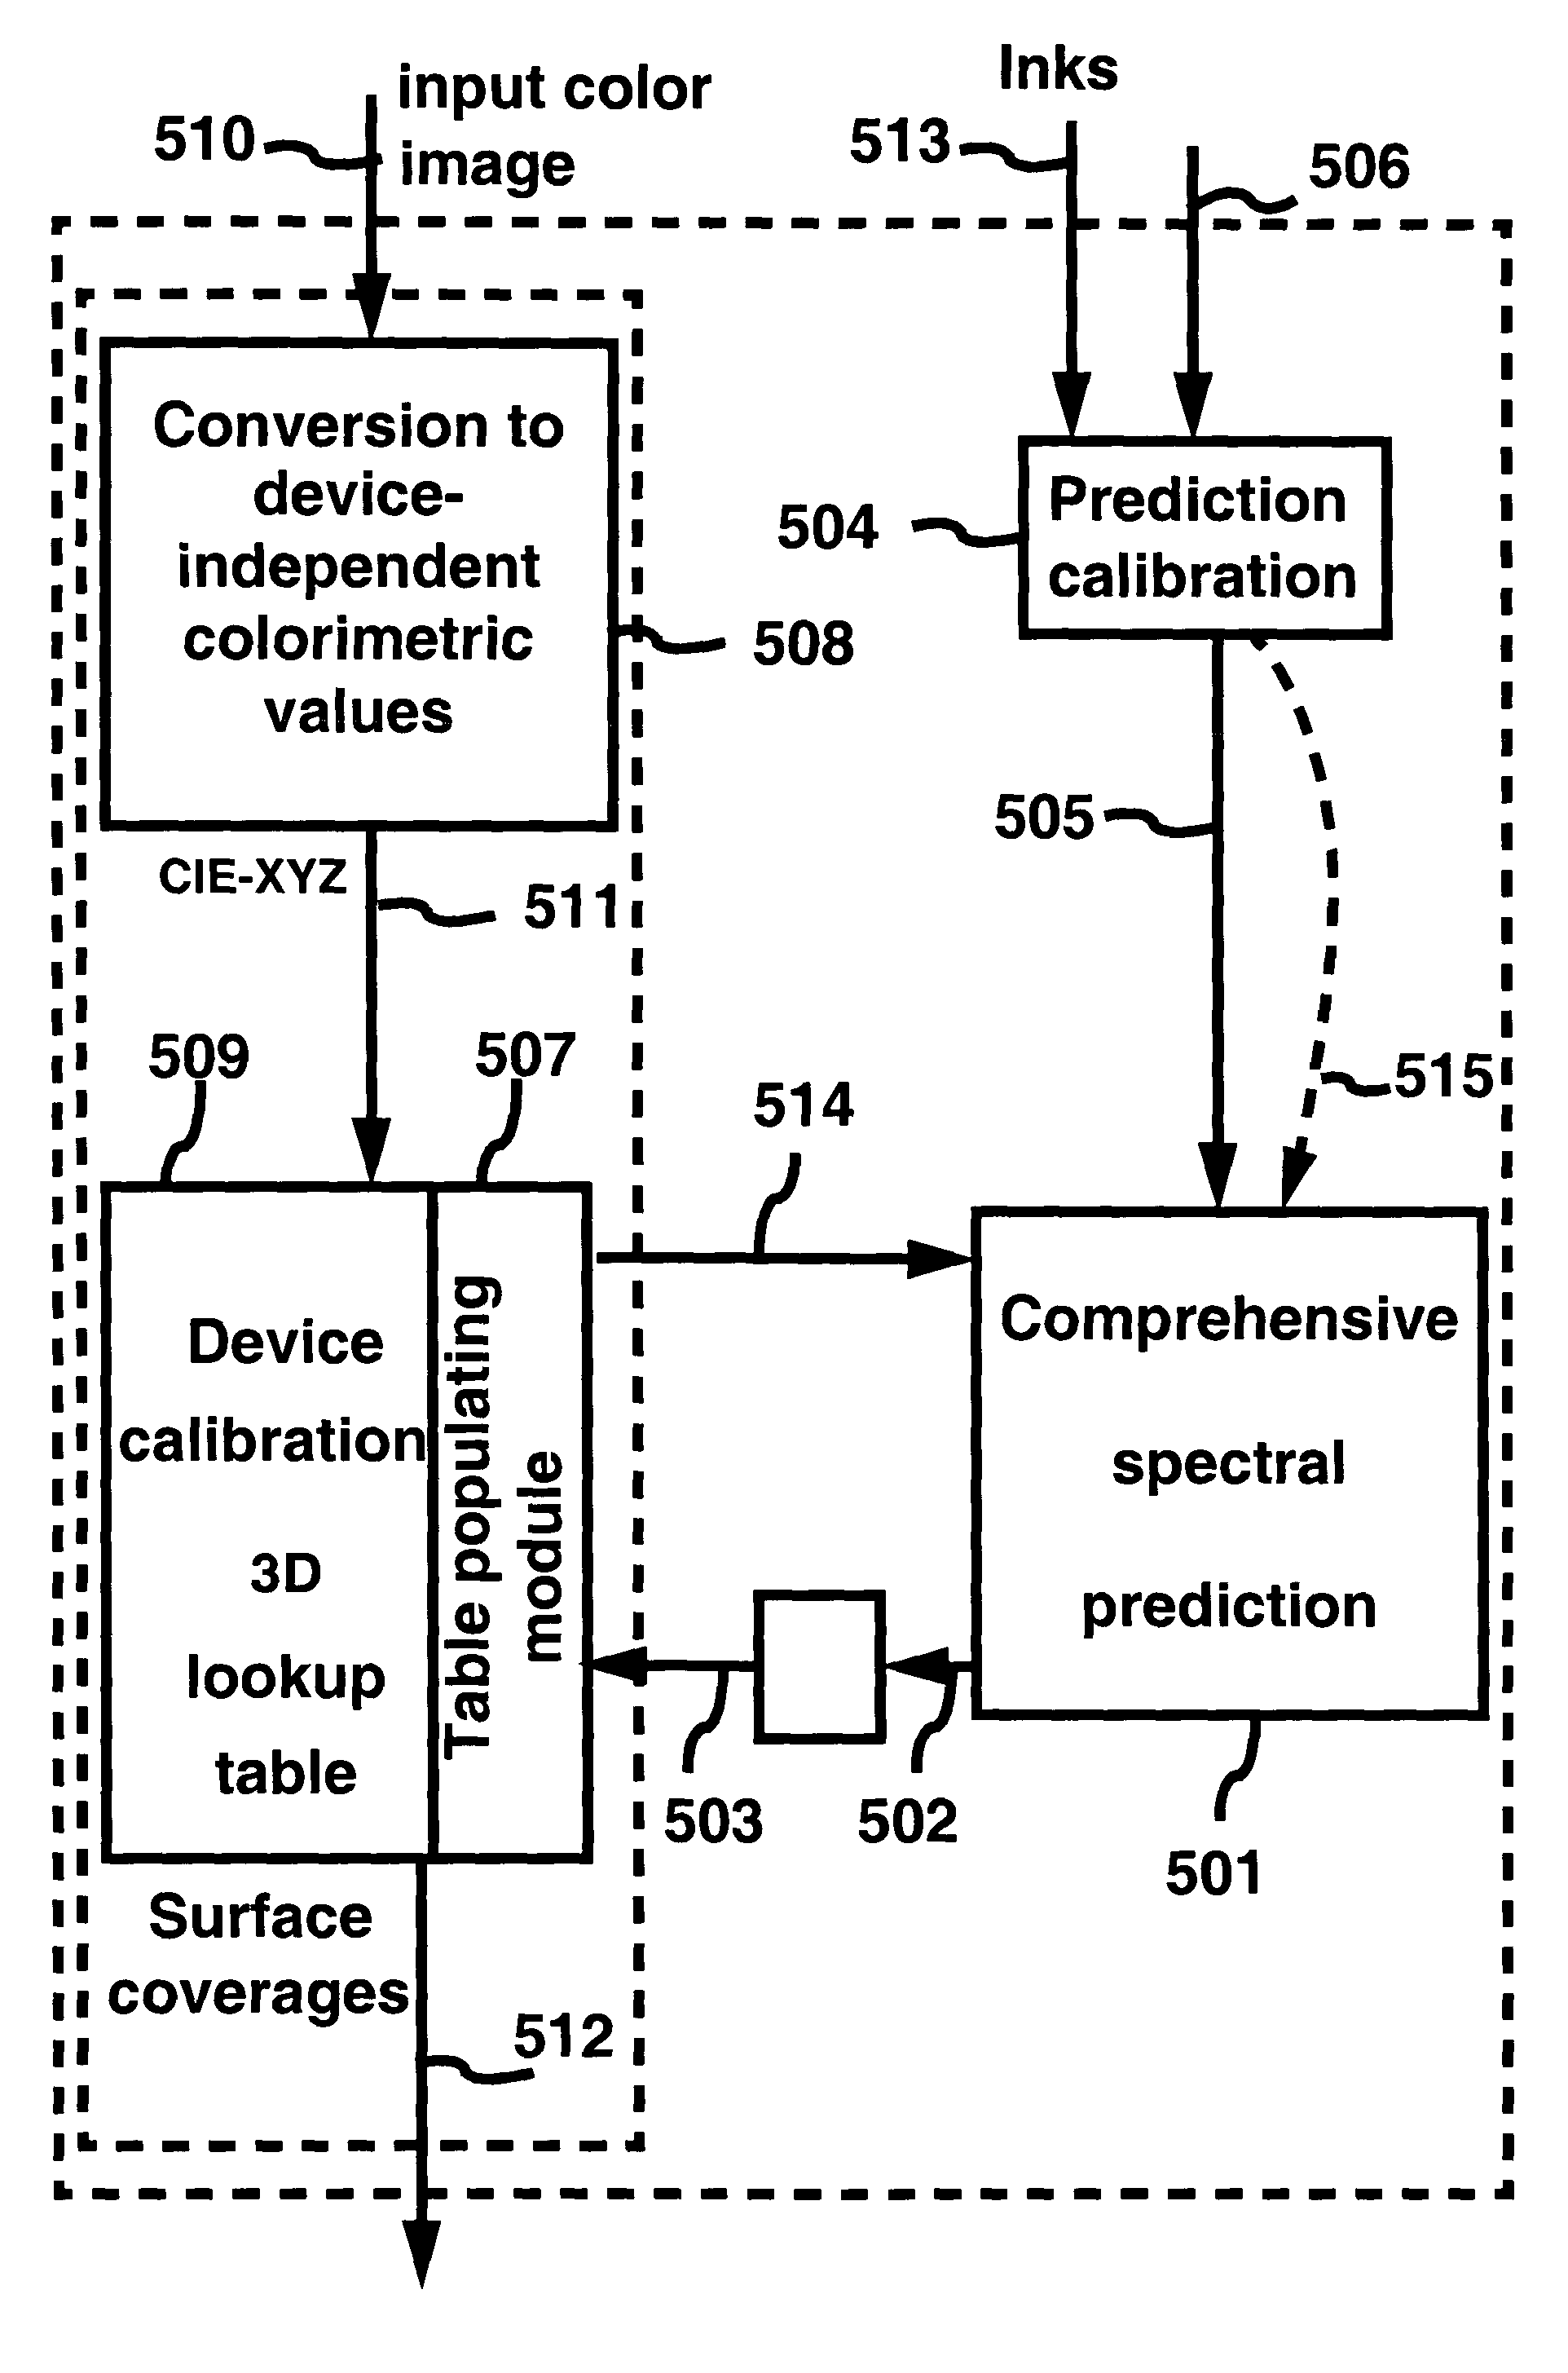 Prediction model for color separation, calibration and control of printers